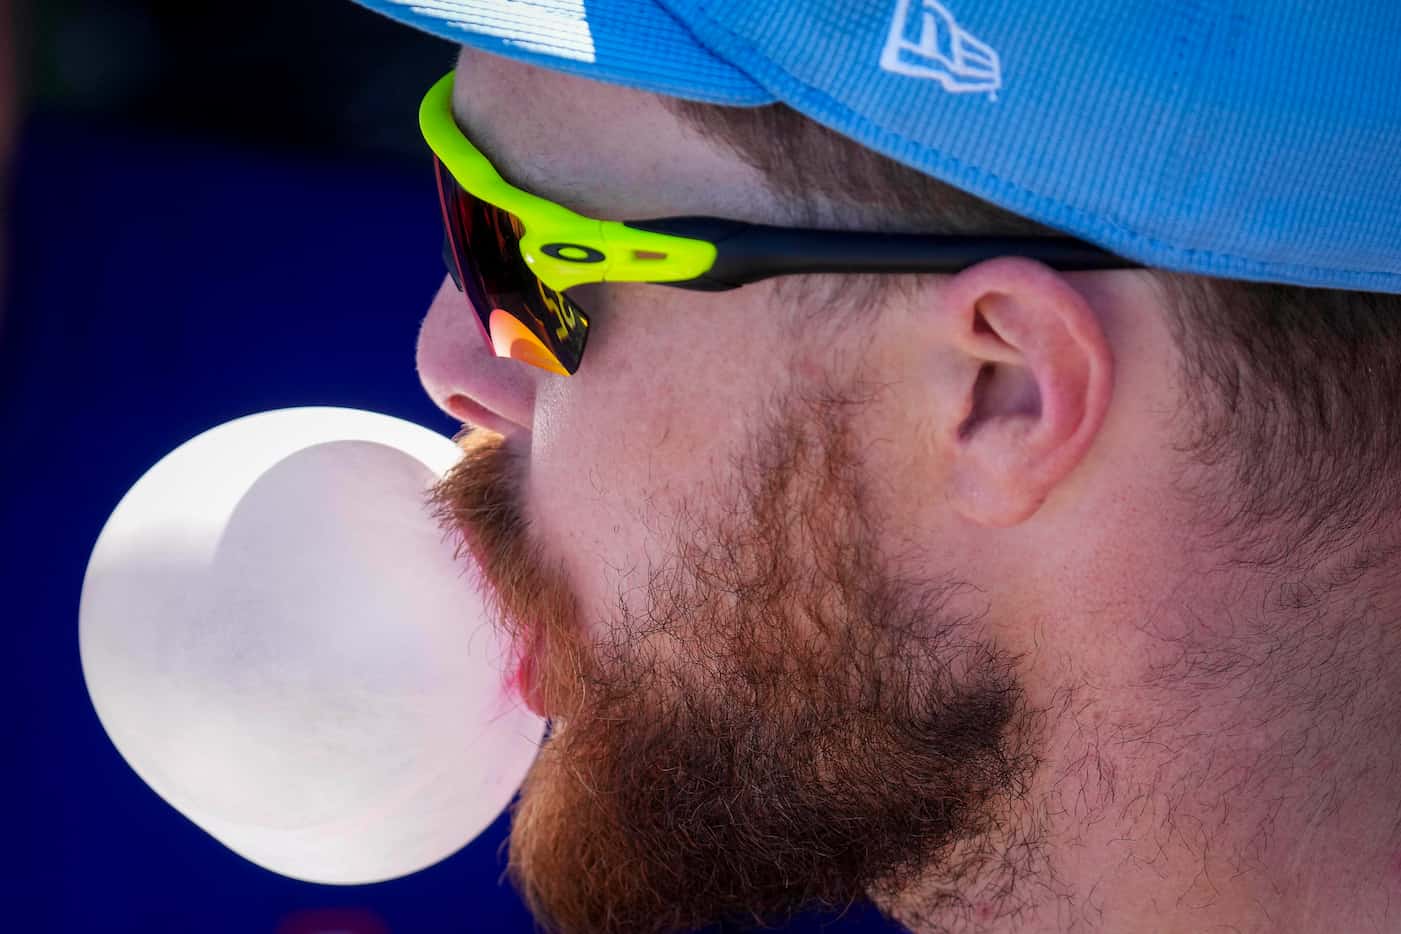 Texas Rangers infielder Jared Walsh blows a bubble in the dugout before a spring training...